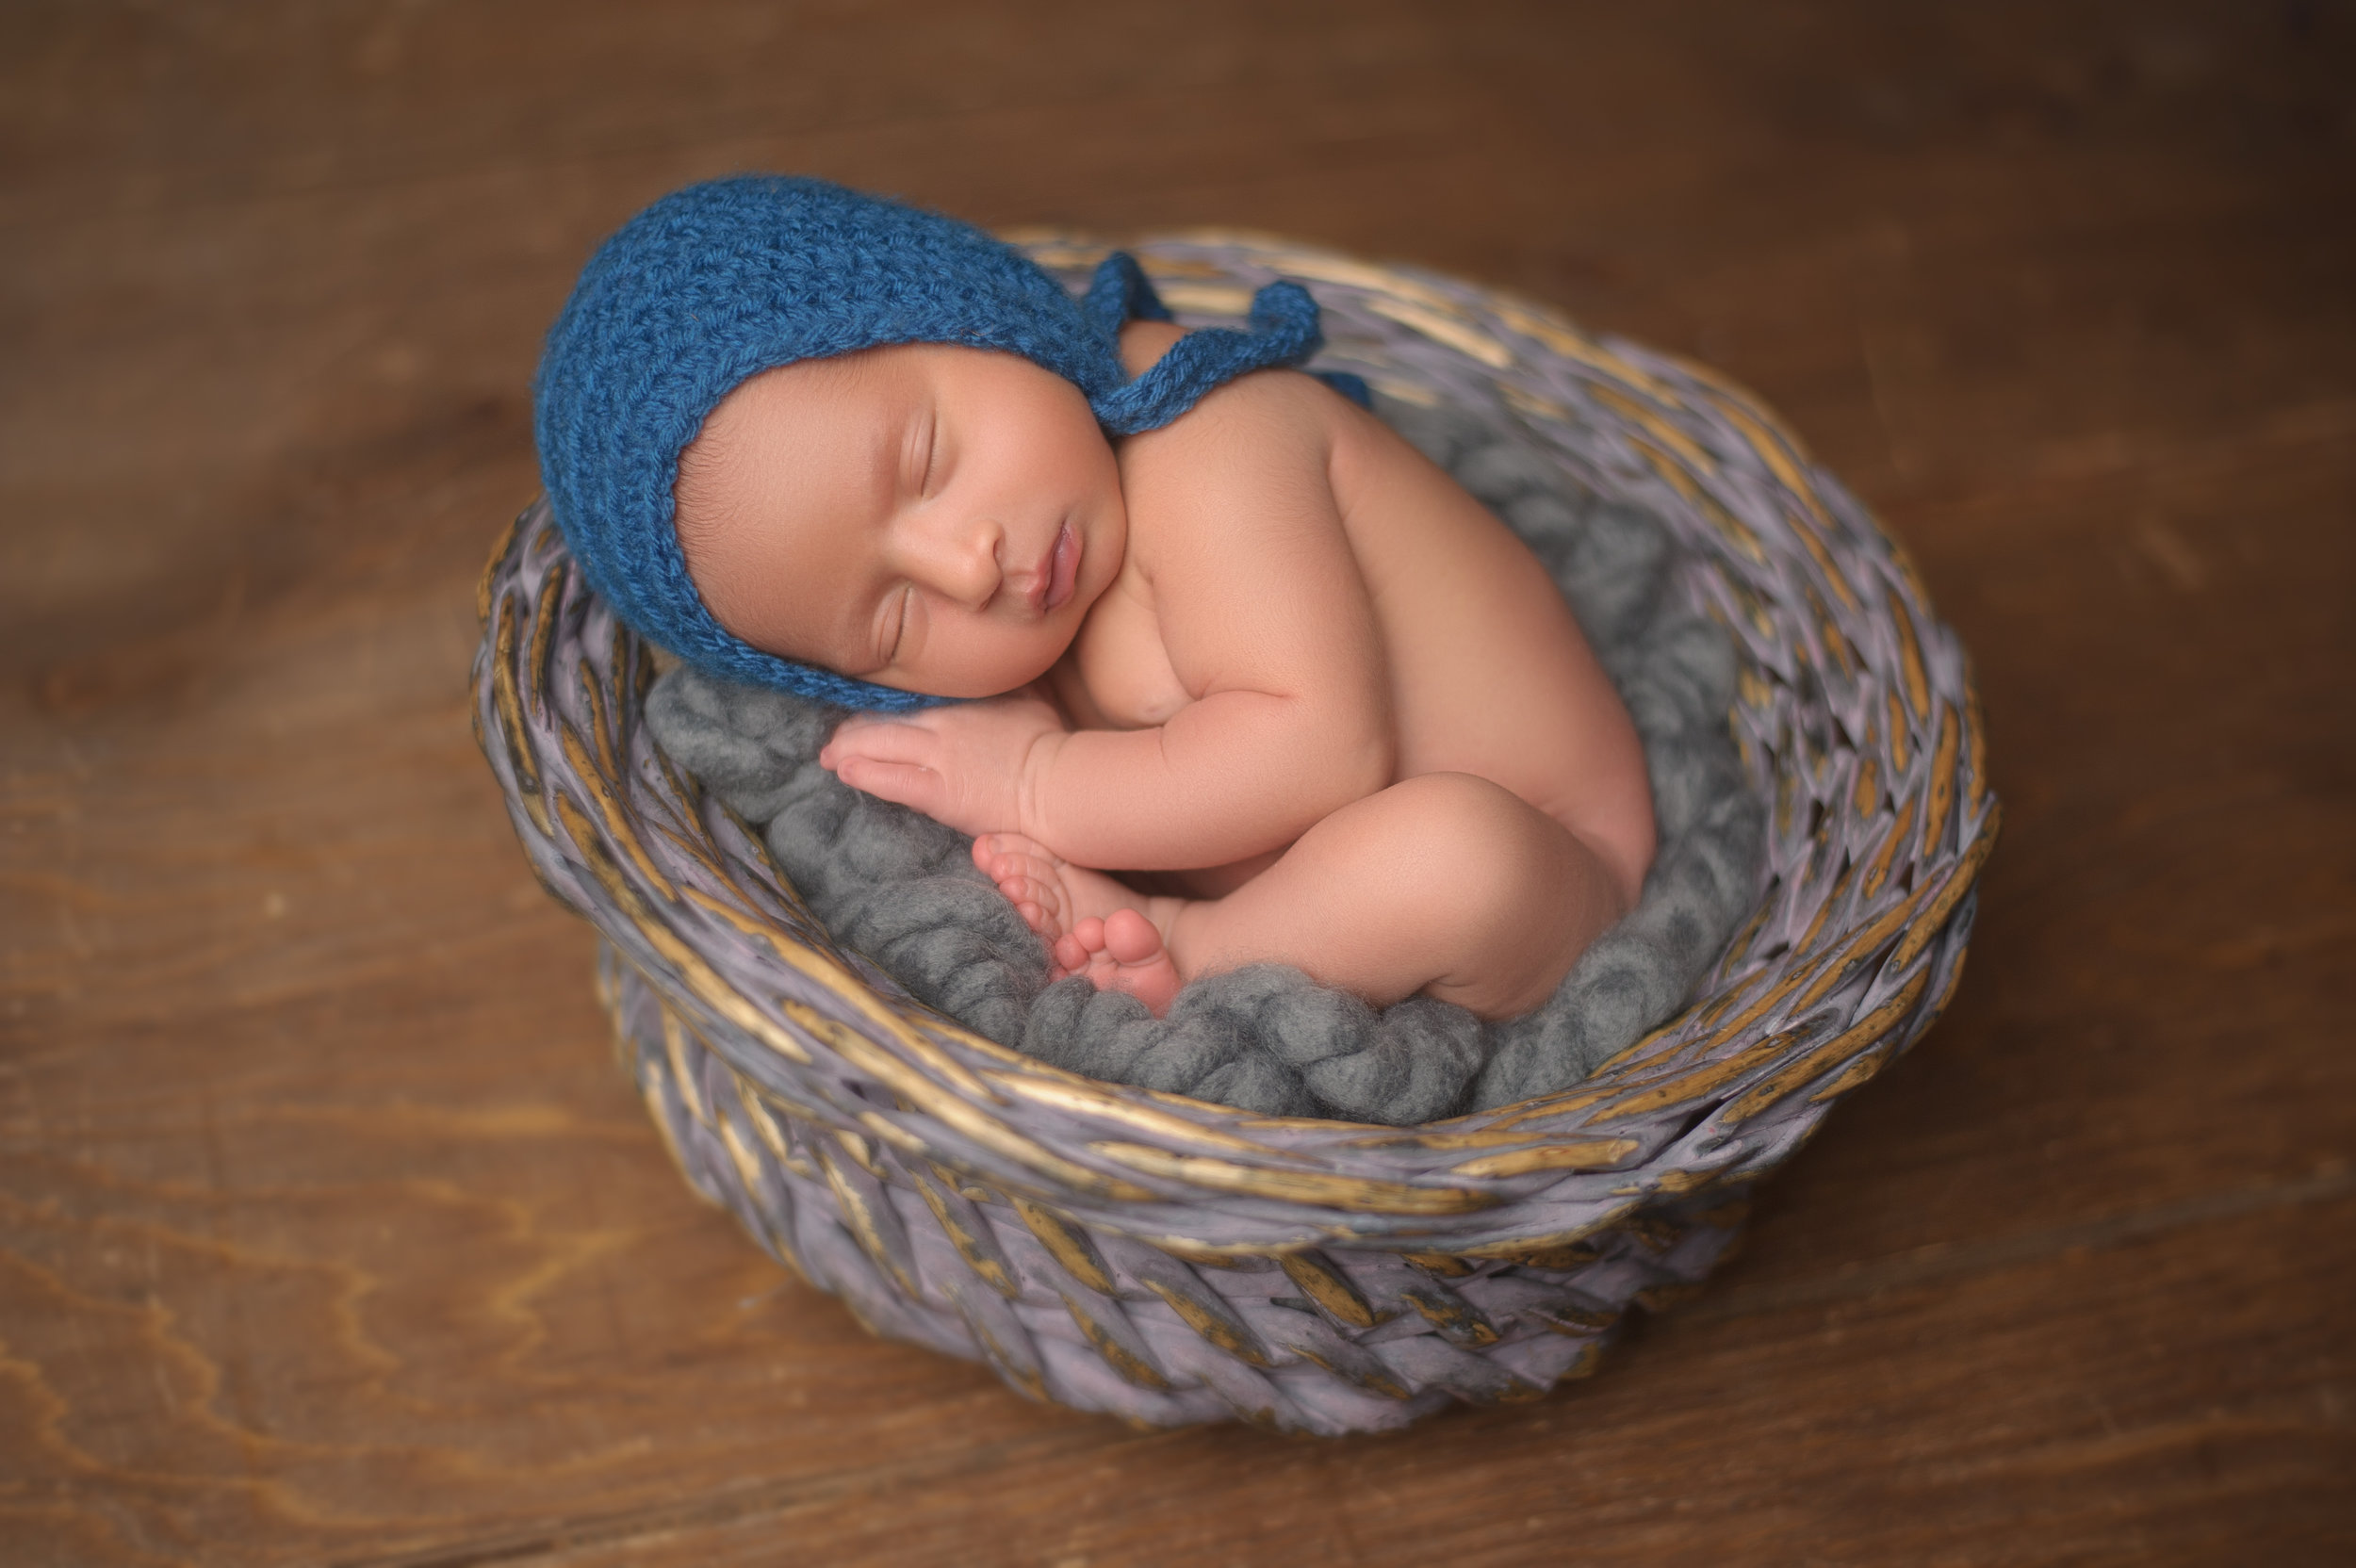 Newborn baby posed in an adorable sleeping position